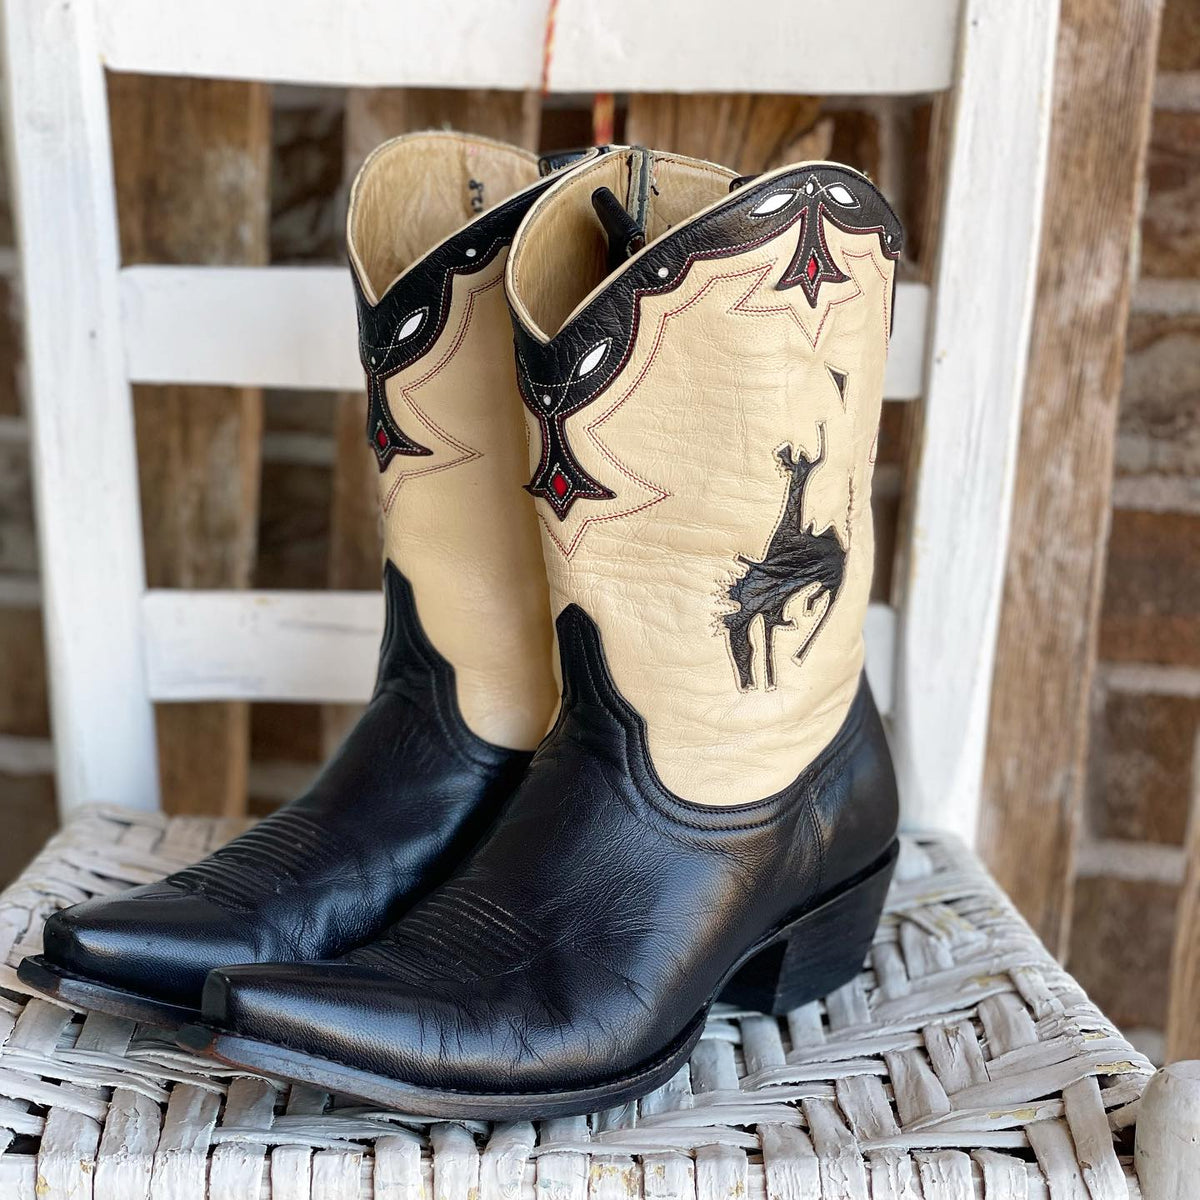 Boots – www.rawhidenrosesboutique.com